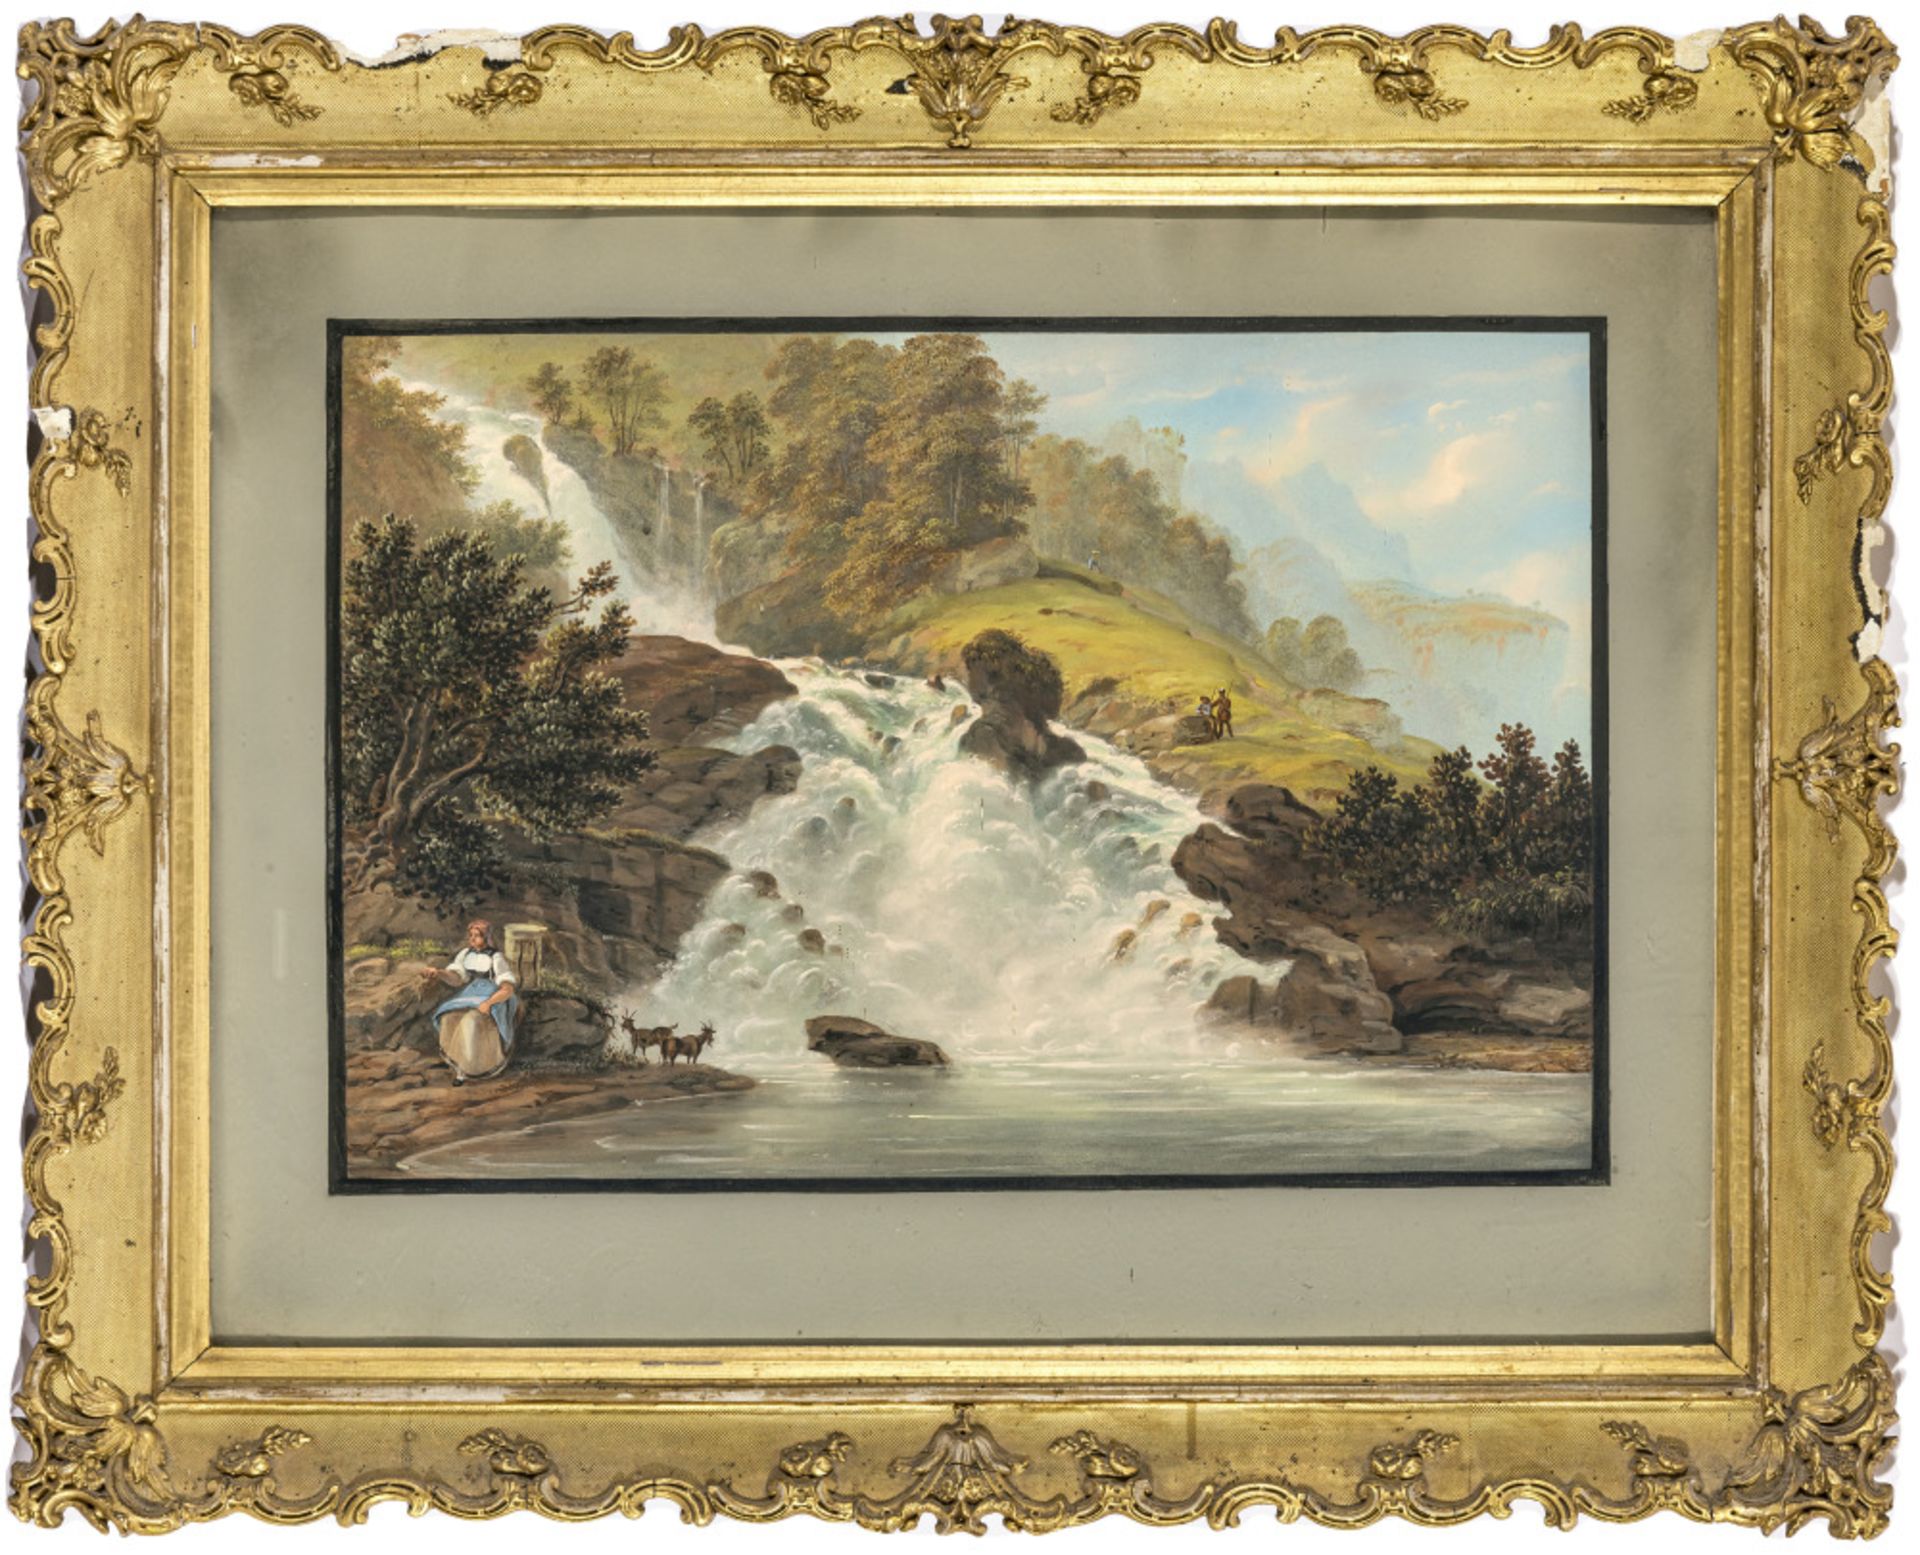 Unbekannt 1st half of the 19th century - Landscape with waterfall and figures - Image 2 of 3